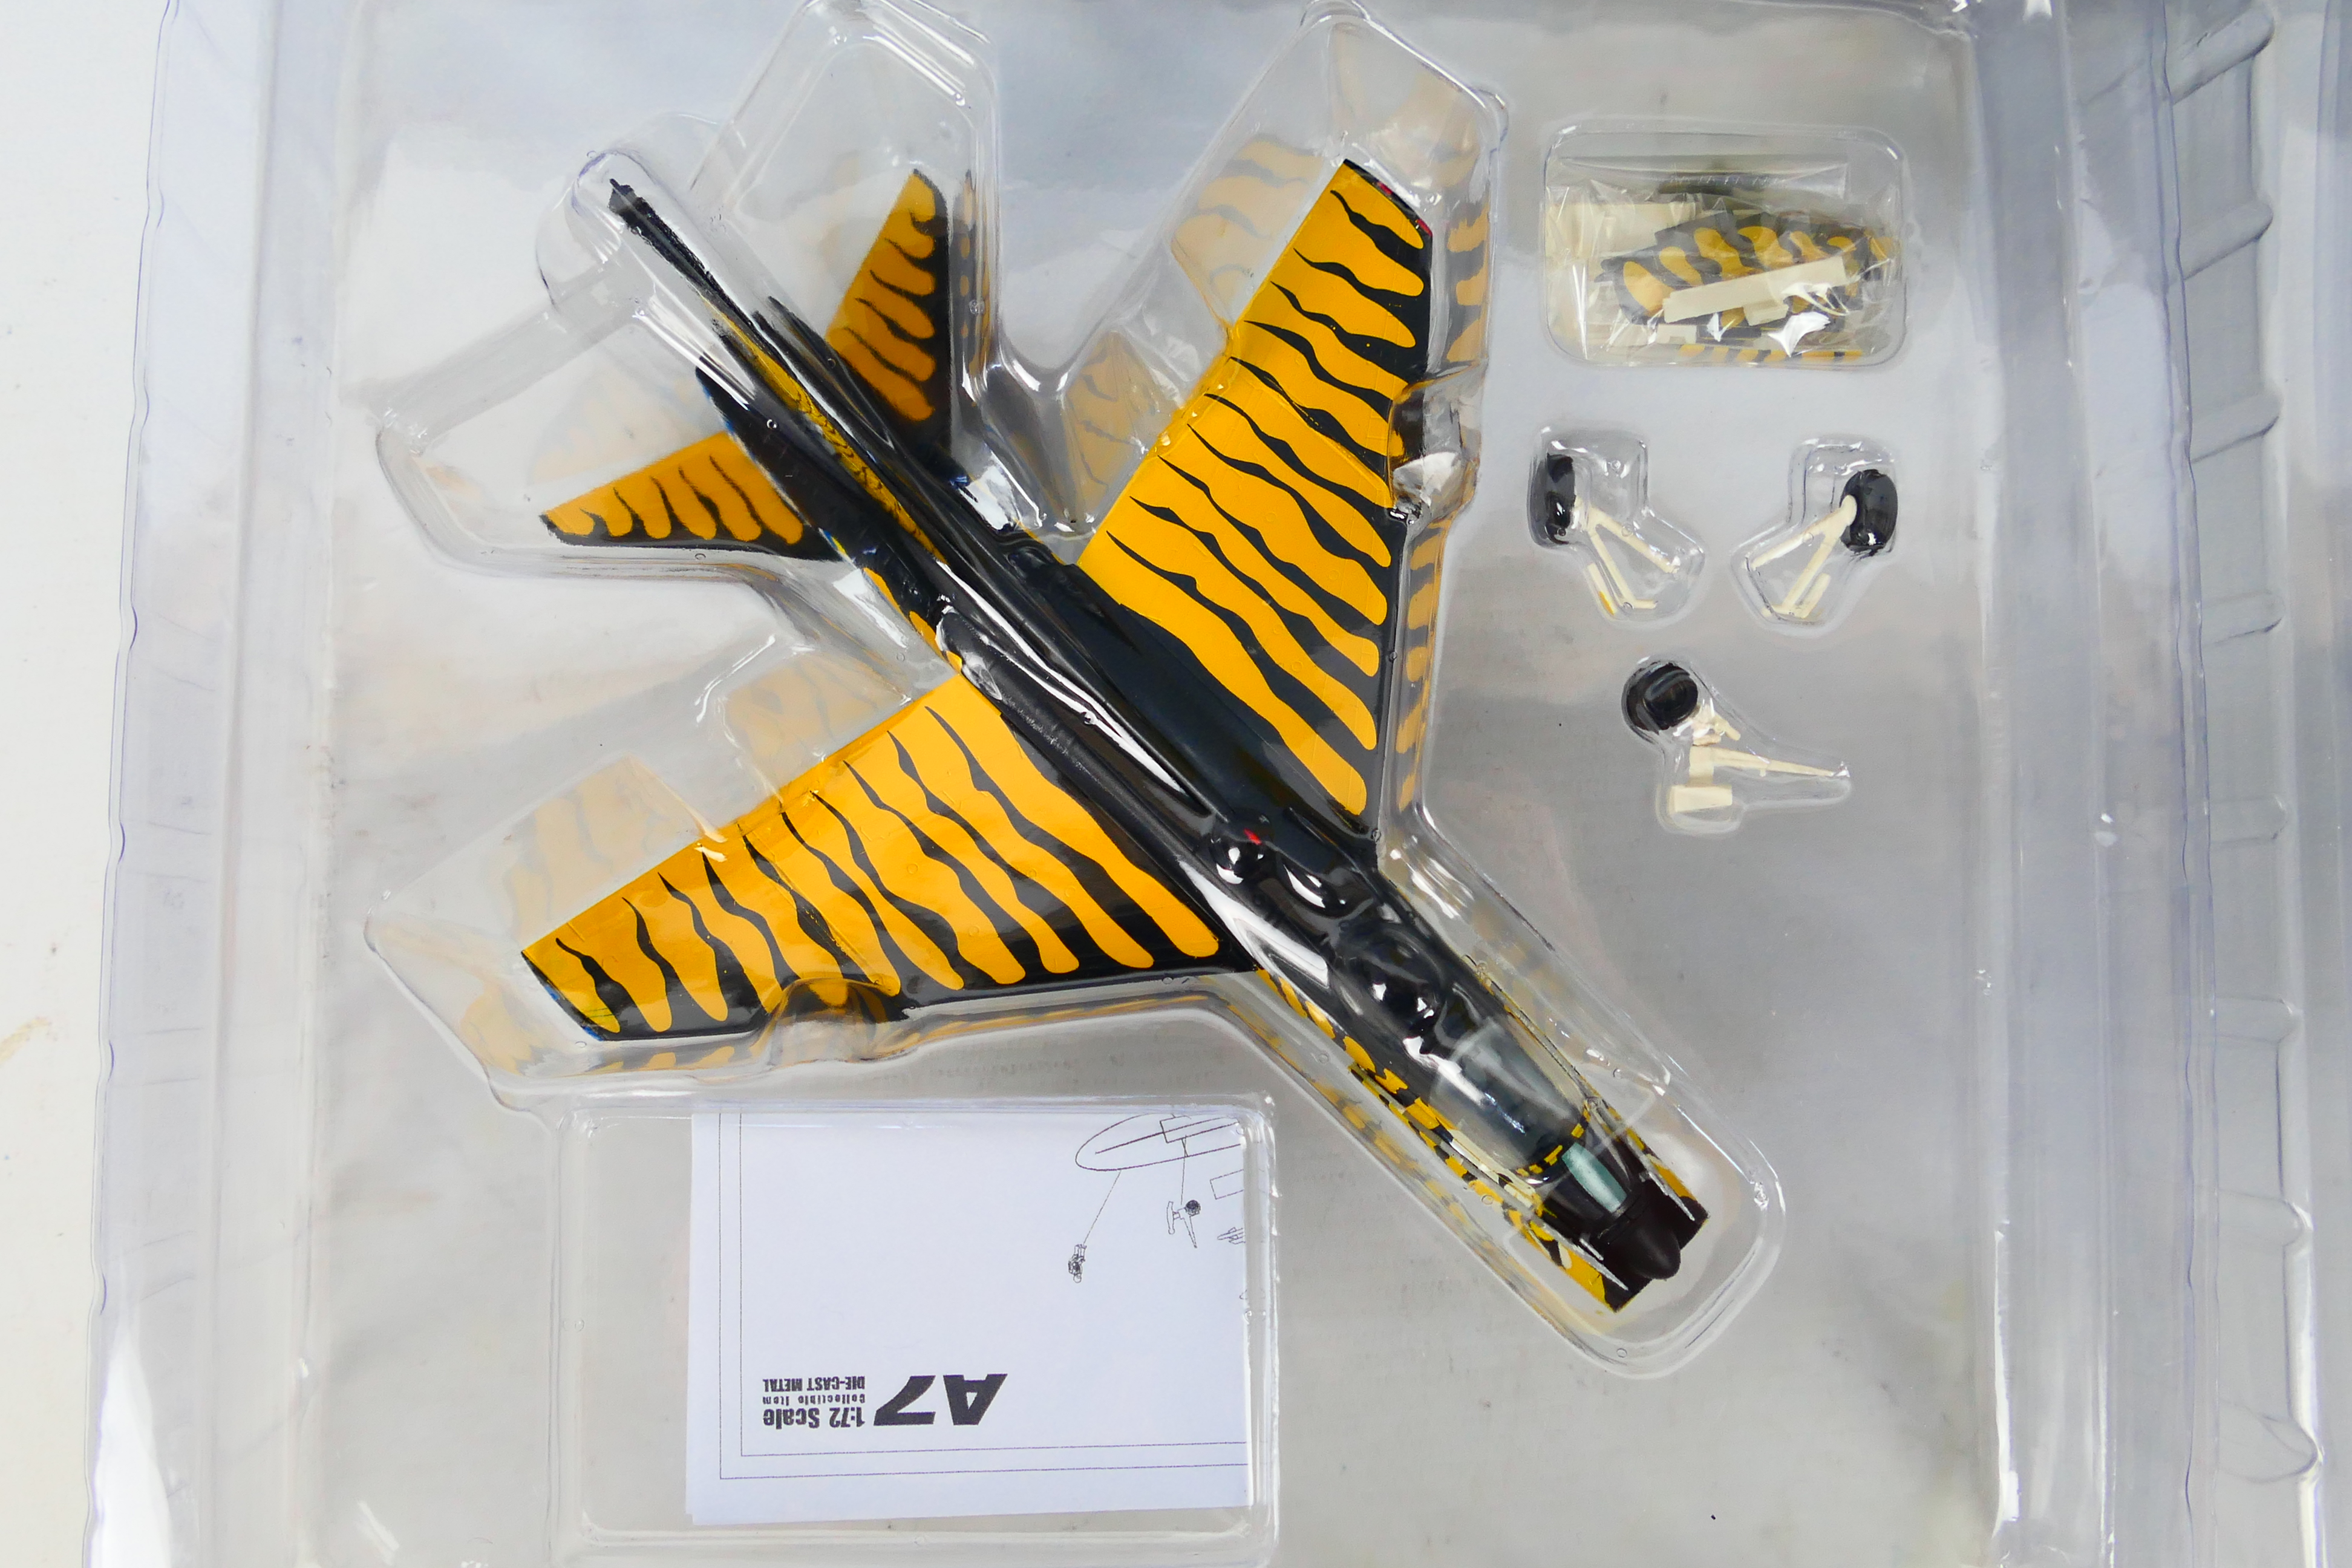 Herpa - Two boxed diecast 1:72 scale military aircraft models from Herpa Military. - Image 2 of 4